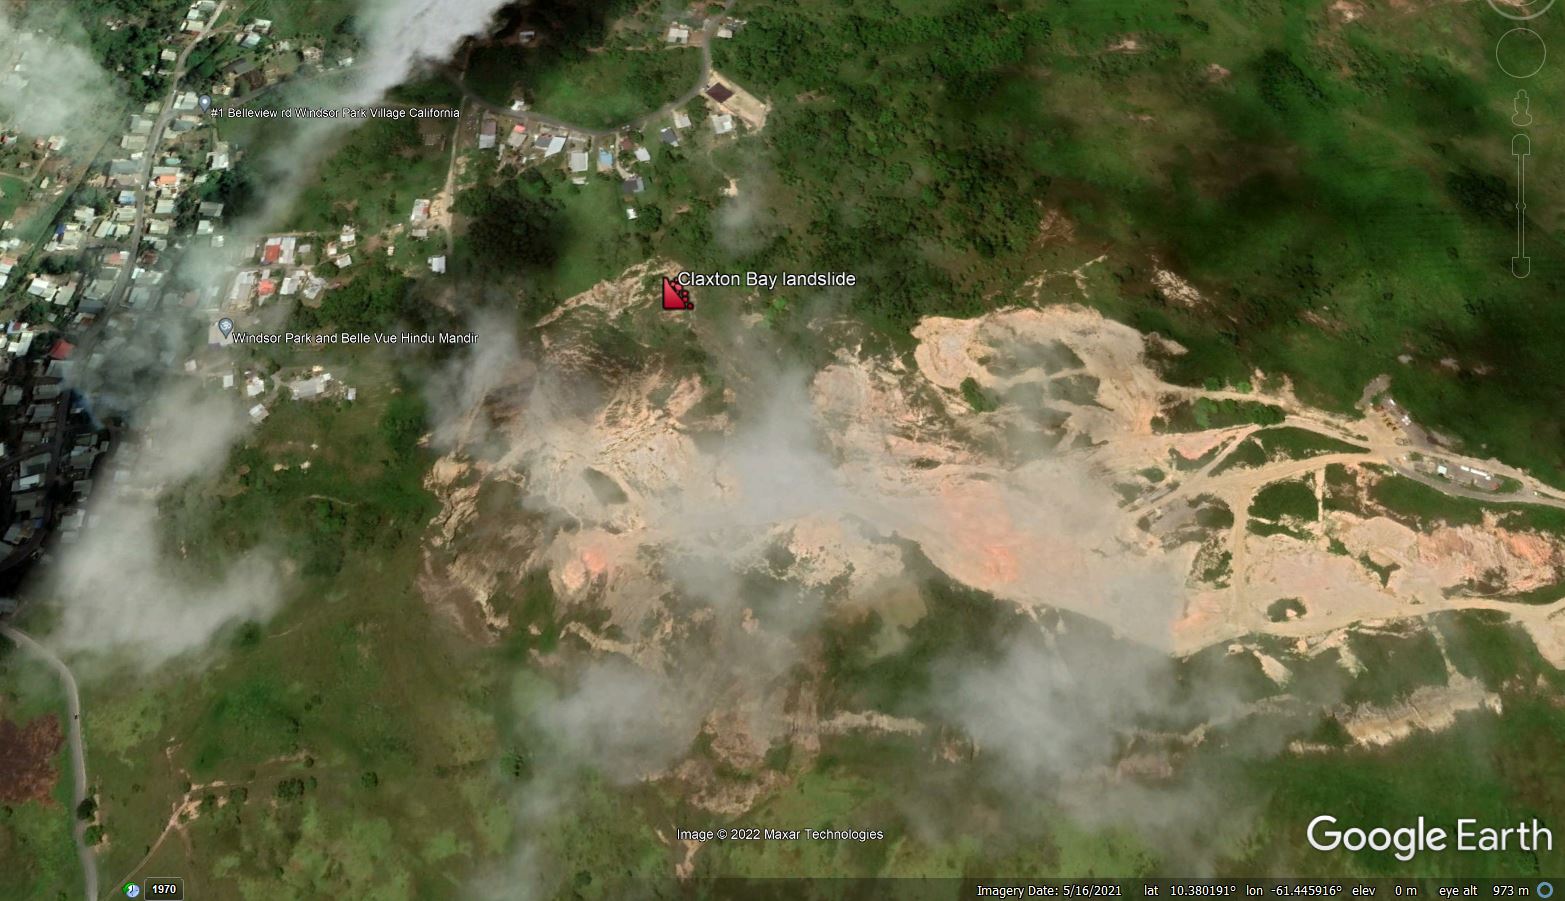 Google Earth image of the site of the Claxton Bay landslide in Trinidad